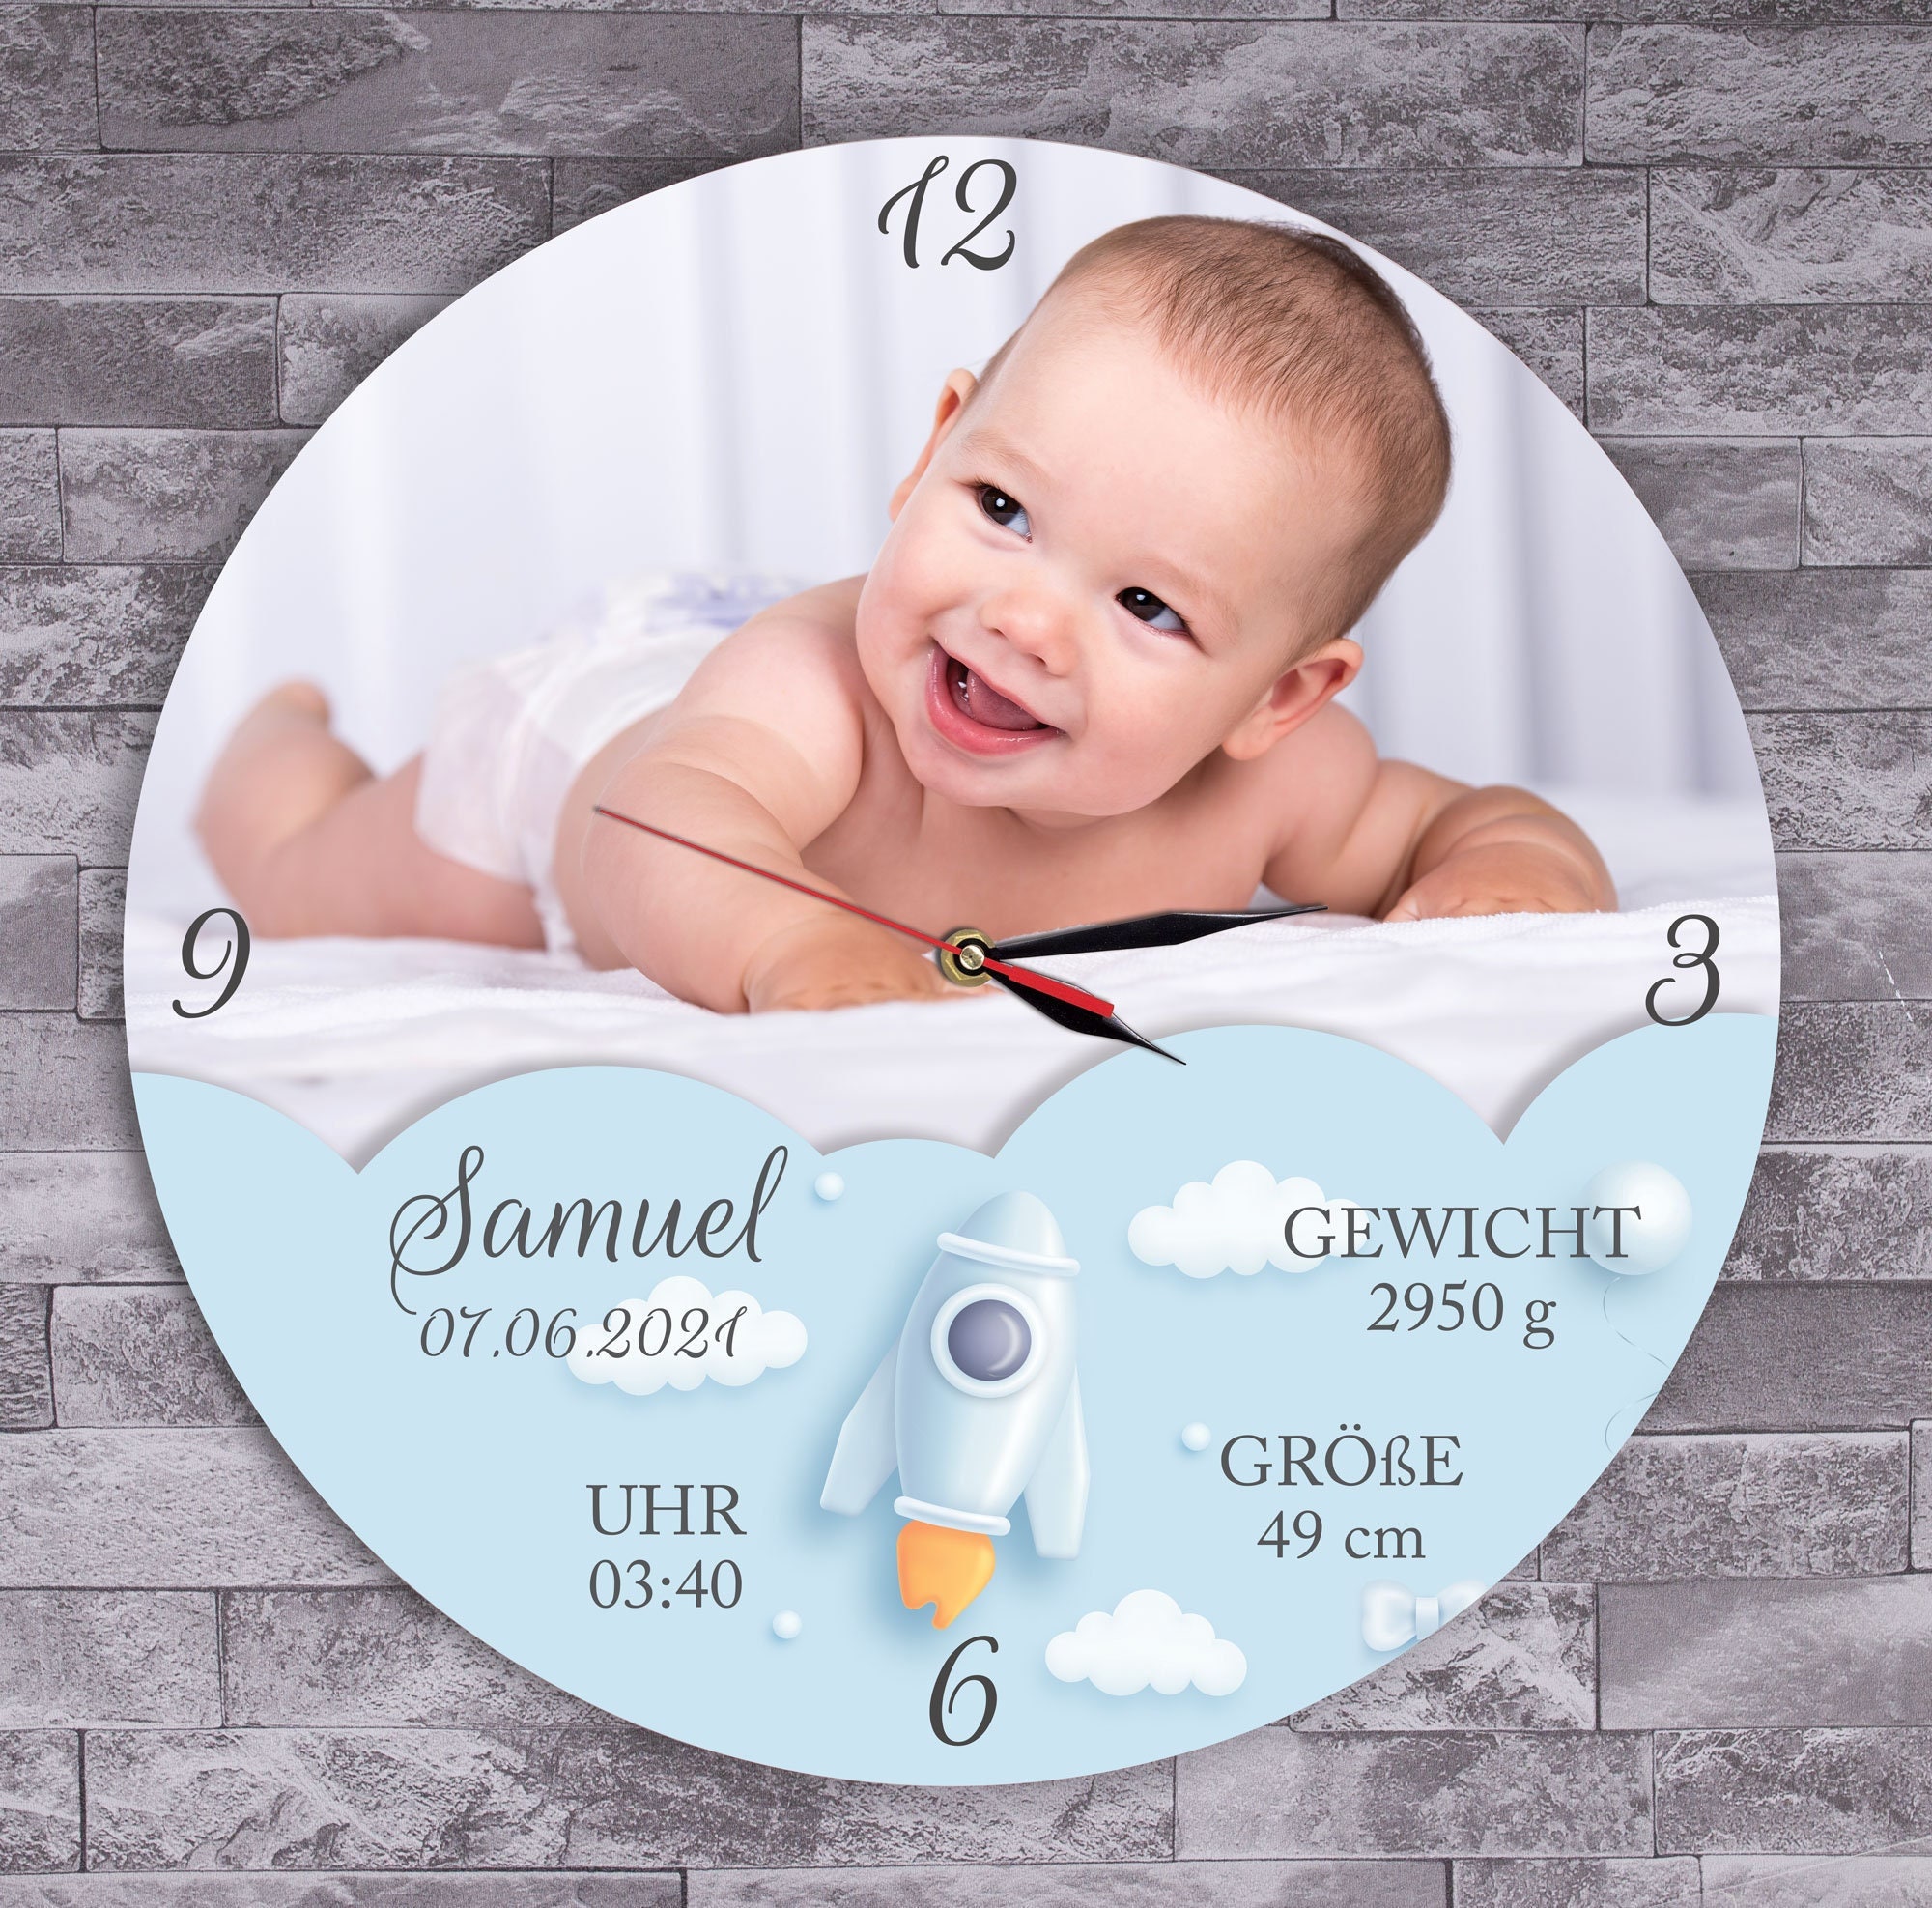 New Baby Gift Names date of birth Weight Time personalised christening baptism 